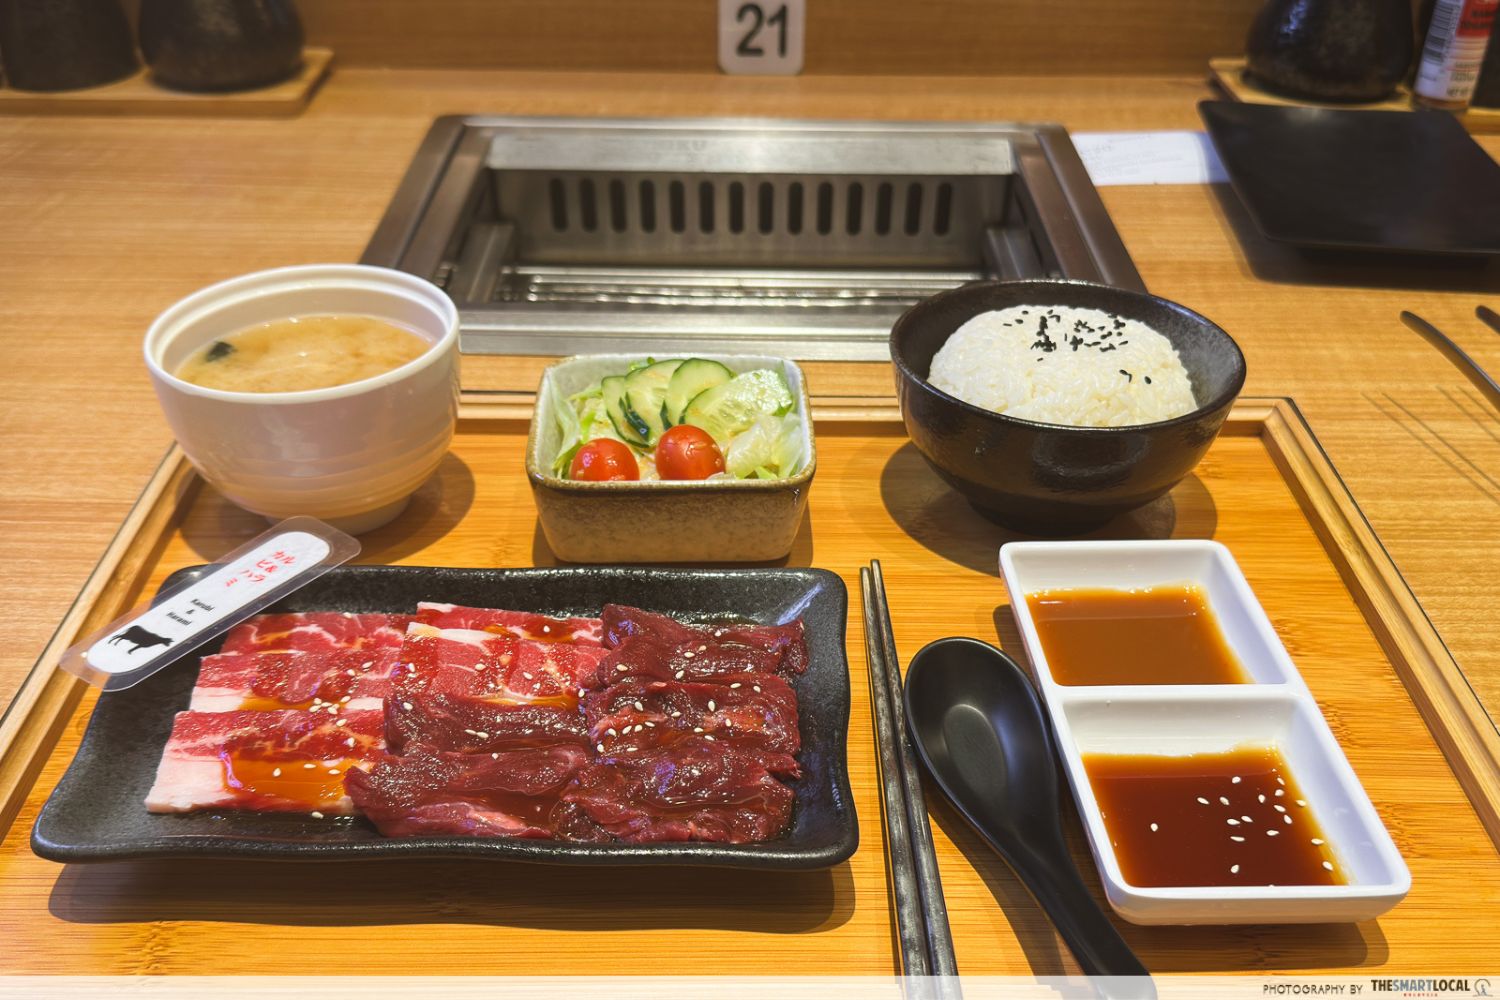 yakiniku set meals with rice, miso soup, salad, condiments, and a plate of beef short plates and skirts